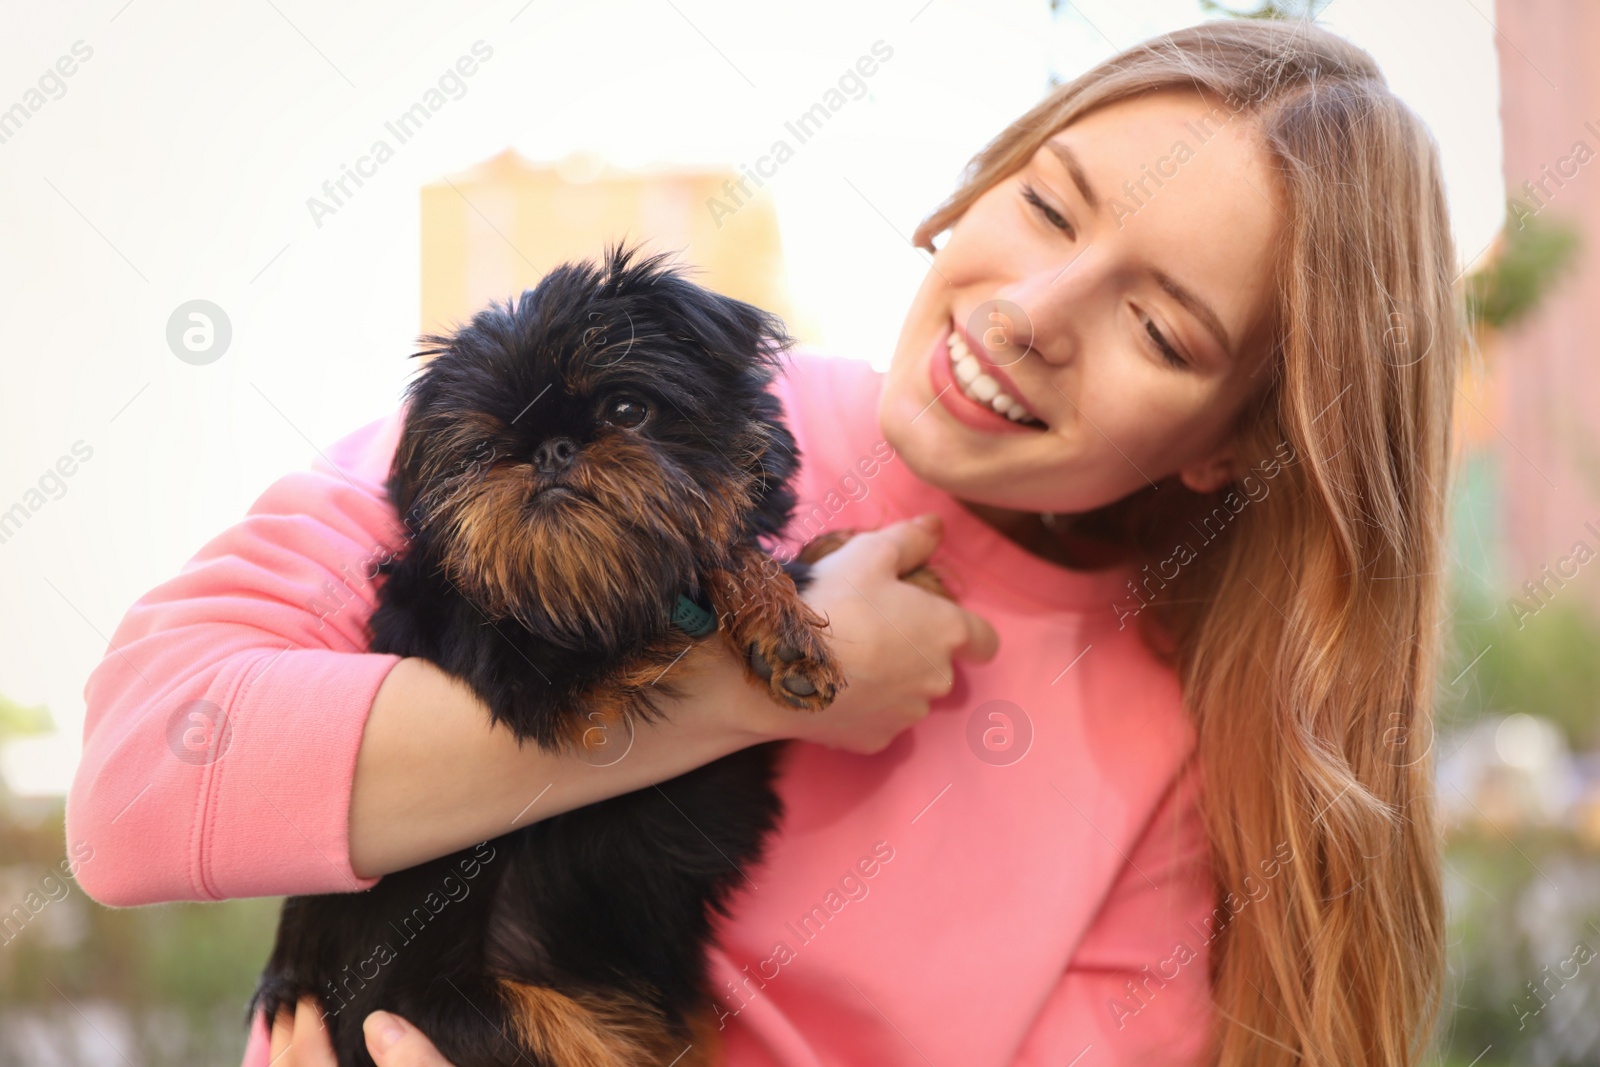 Photo of Young woman with adorable Brussels Griffon dog outdoors